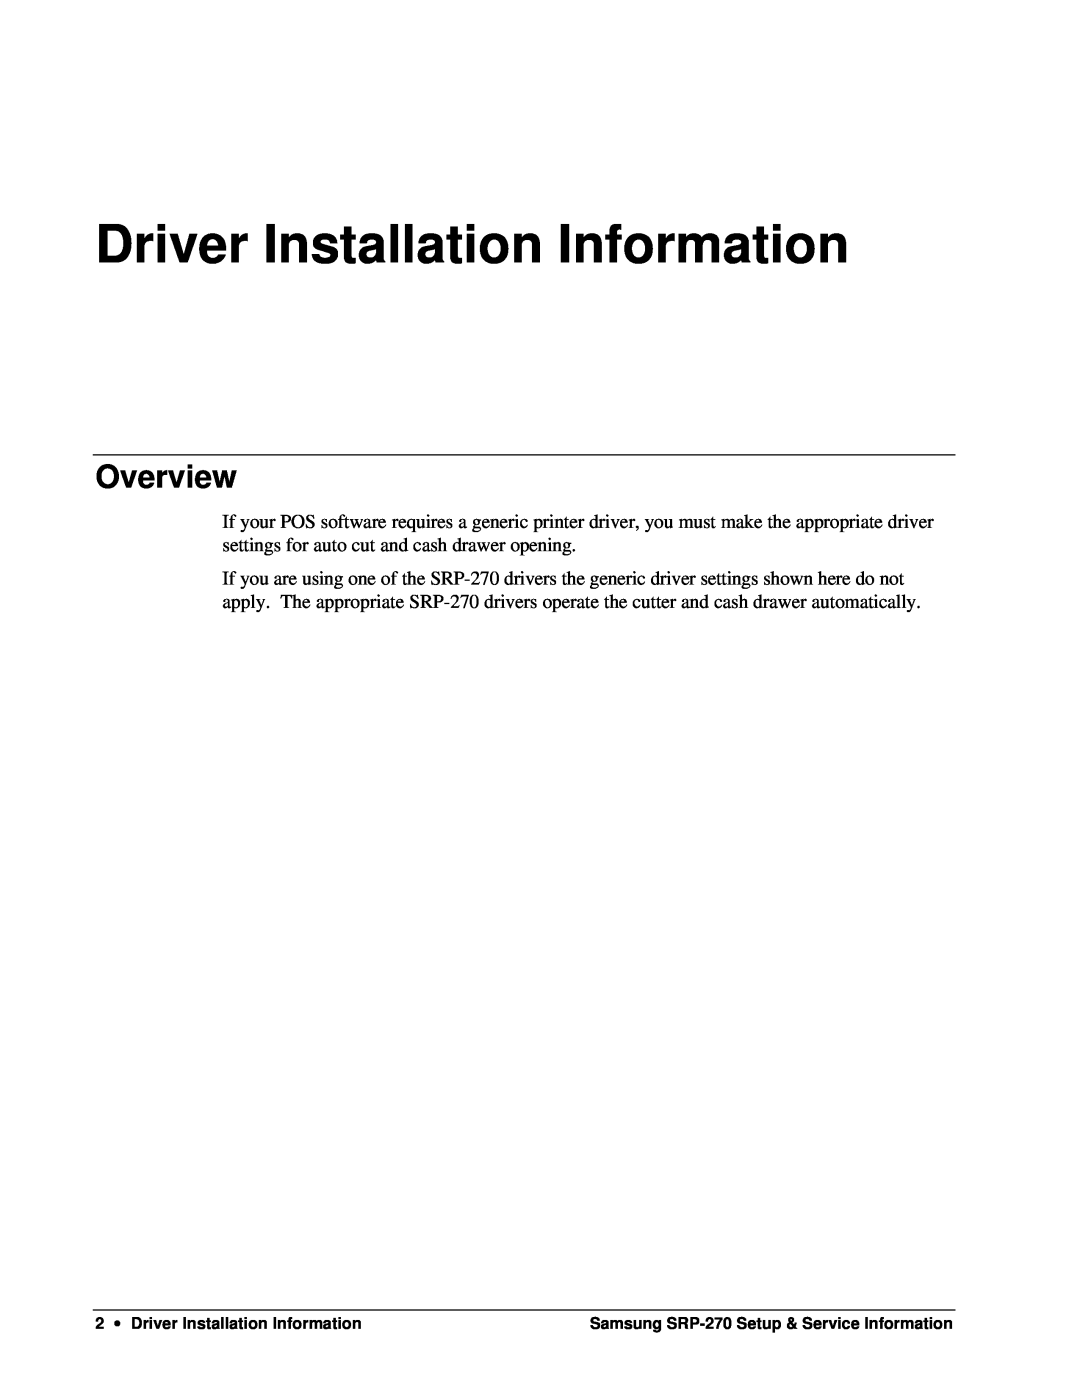 Samsung SRP-270 specifications Driver Installation Information, Overview 